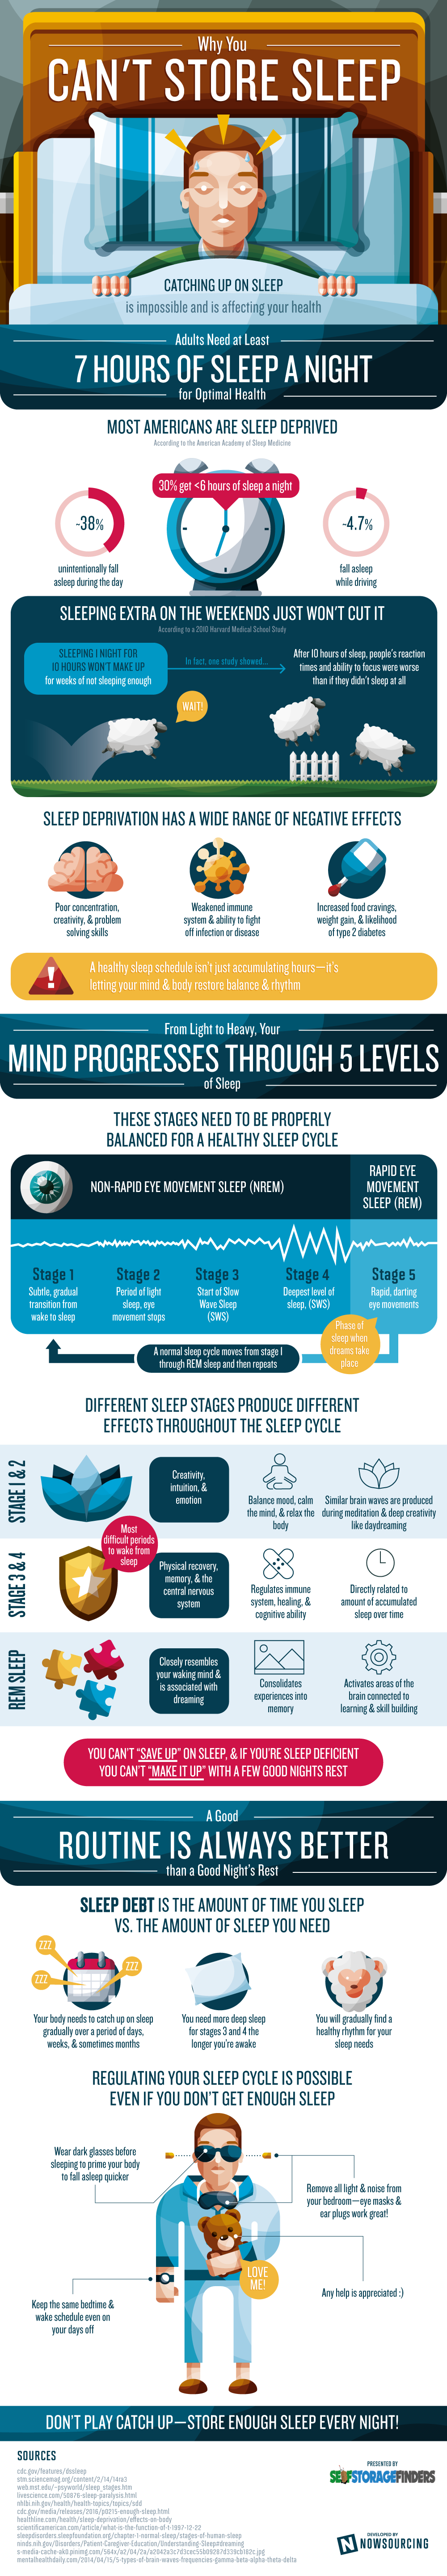 Why You Can't Store Sleep